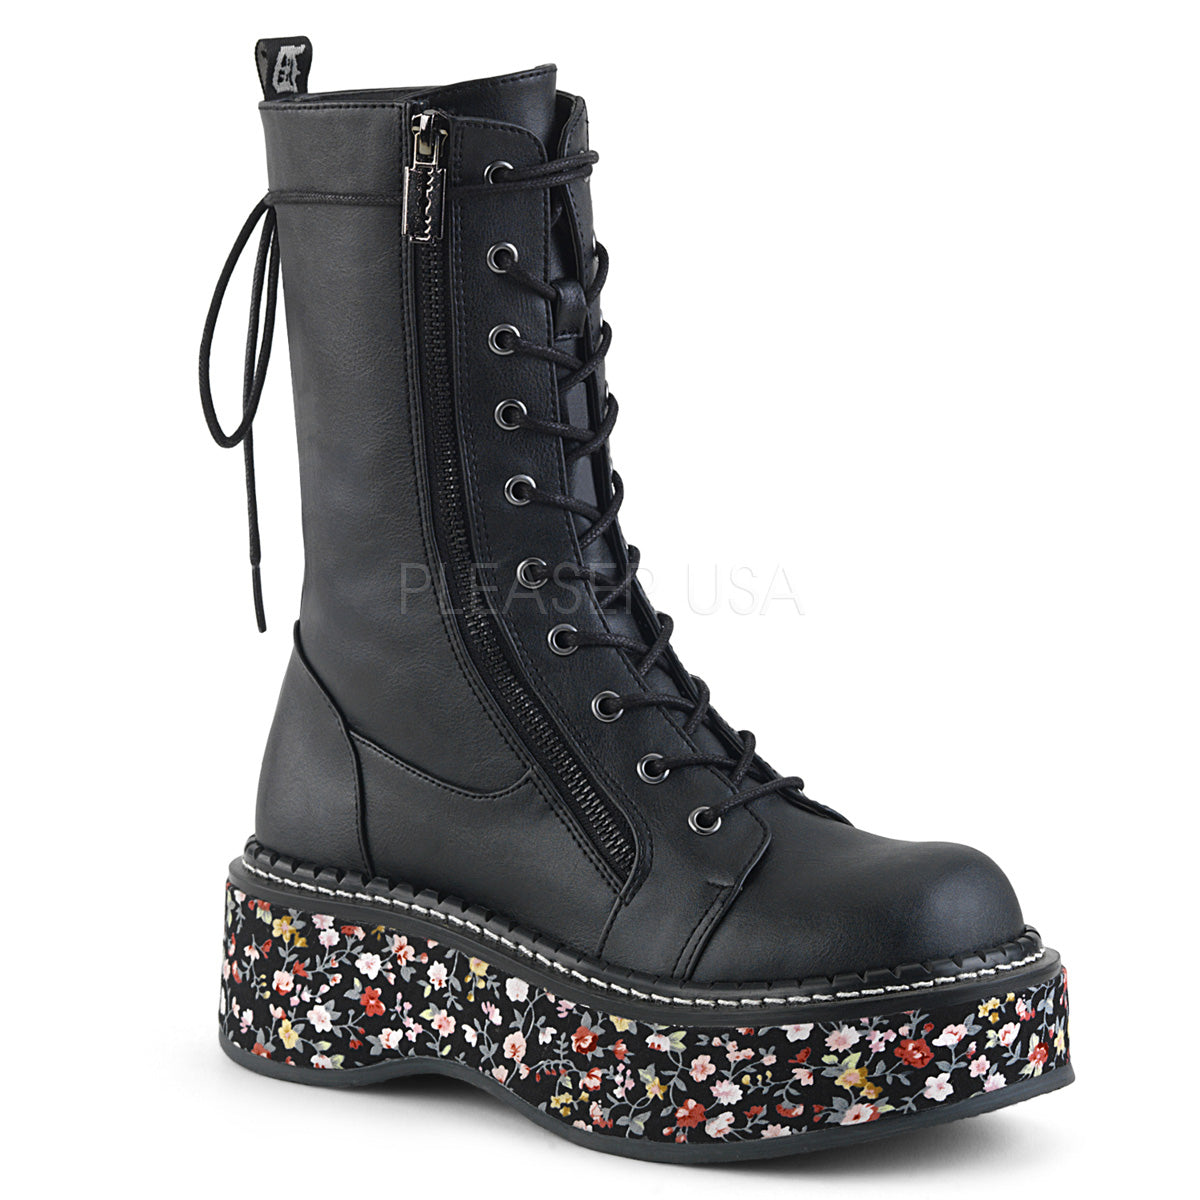 Demonia EMILY-350 Black 2" Floral Fabric Wrapped Platform Mid-Calf Lace-Up Boot With Outer Metal Zipper & Razor Blade Zipper Pull